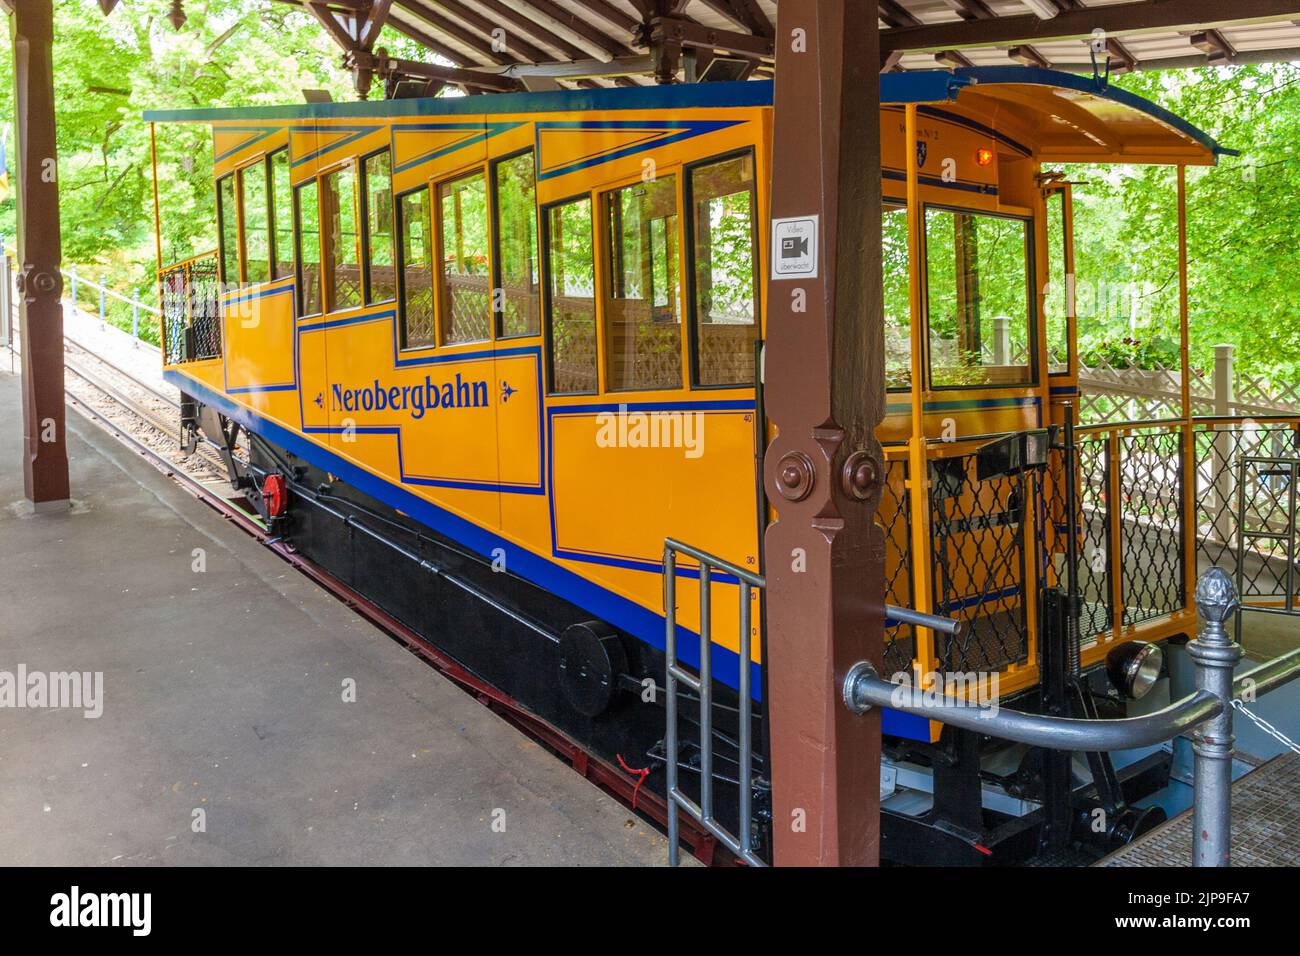 Great close-up view of a carriage of the Nerobergbahn funicular with its characteristic yellow colour at the lower station in Wiesbaden, Germany. The... Stock Photo